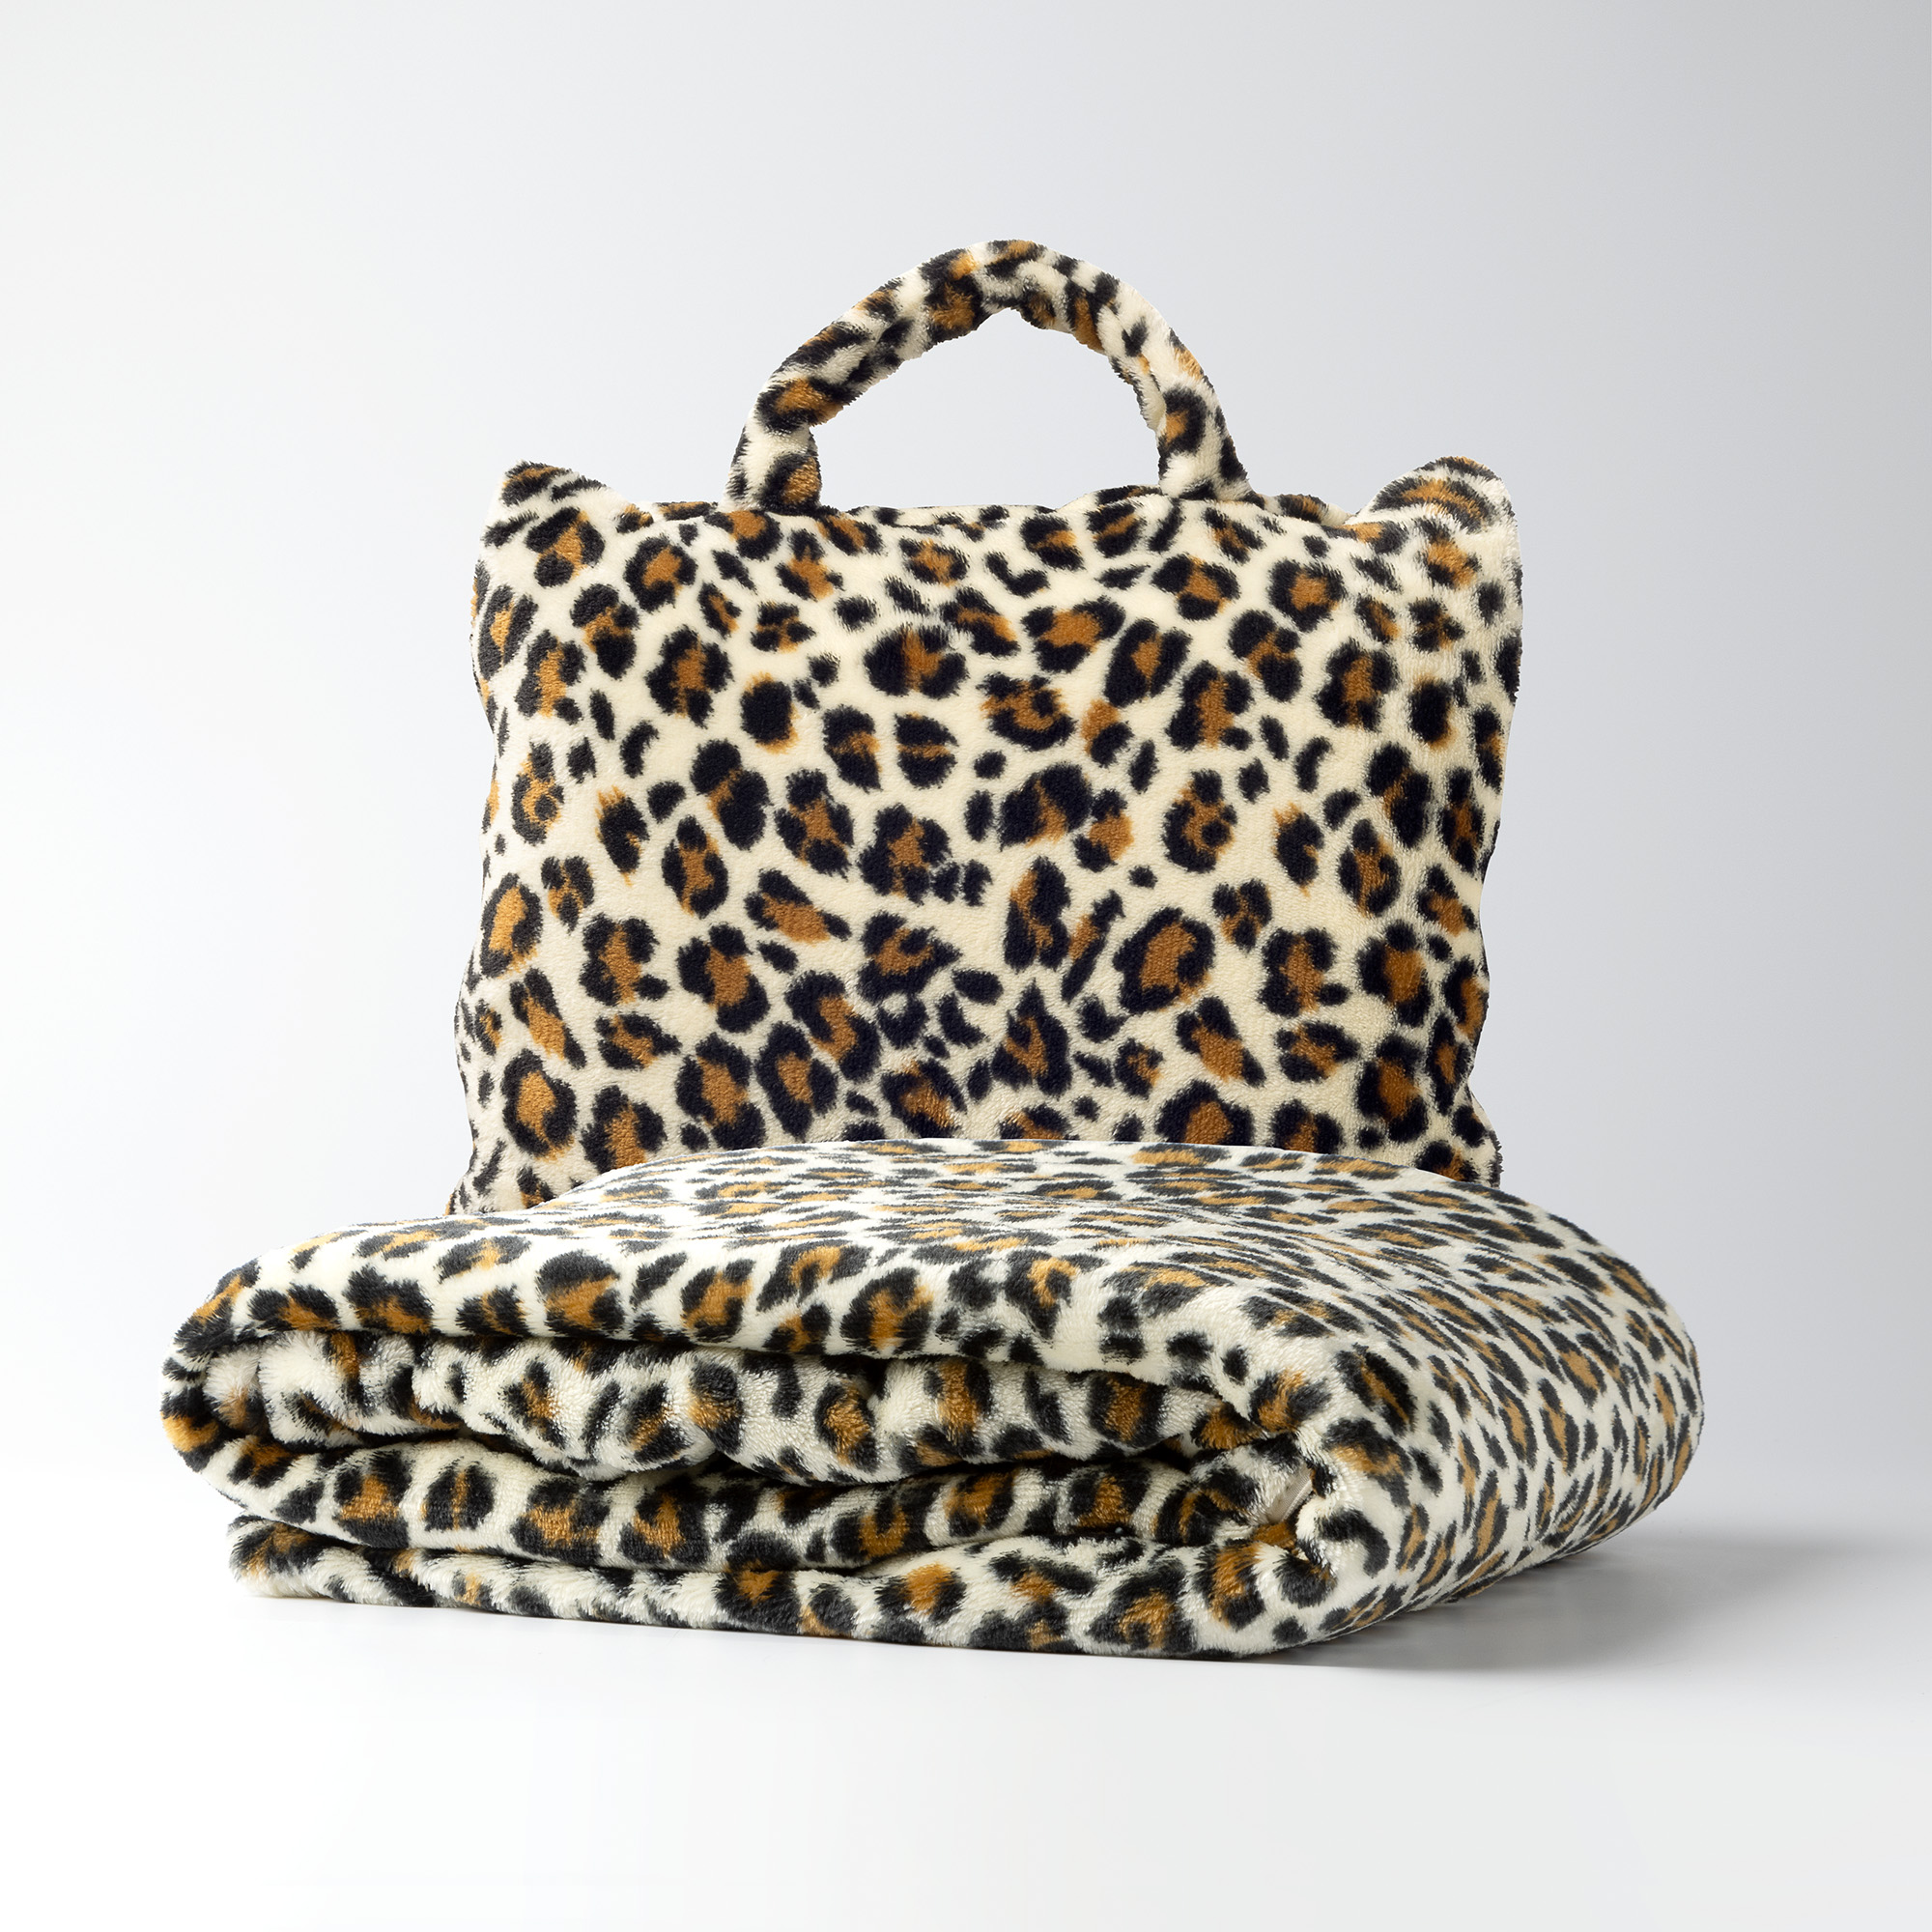 TANJA - Plaid Plaid to Go - 130x150 cm - Pumice Stone Leopard - ideal for traveling - folds into handy bag